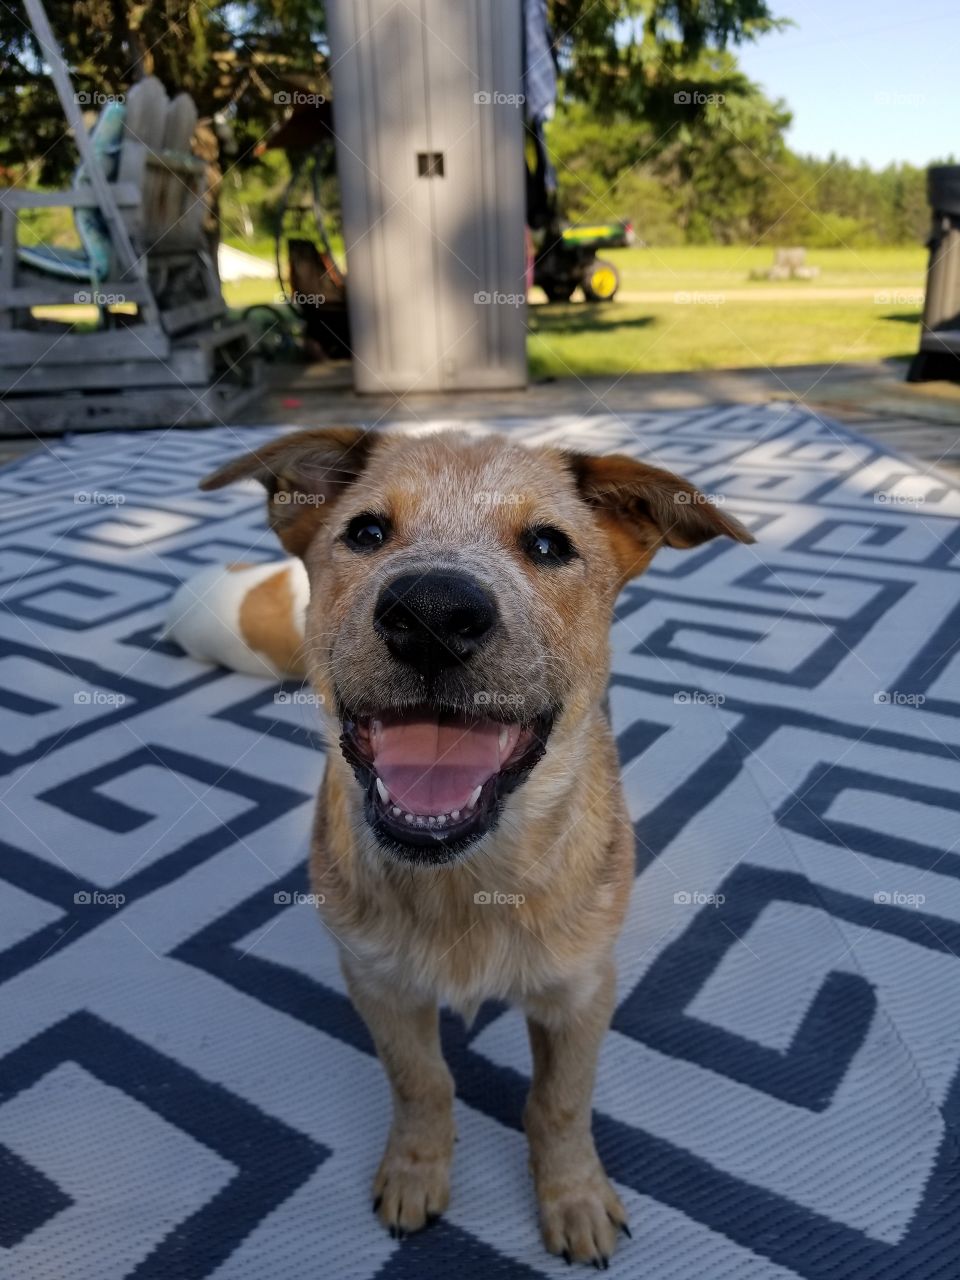 Cooper the Australian cattle dog puppy smiling because life is good